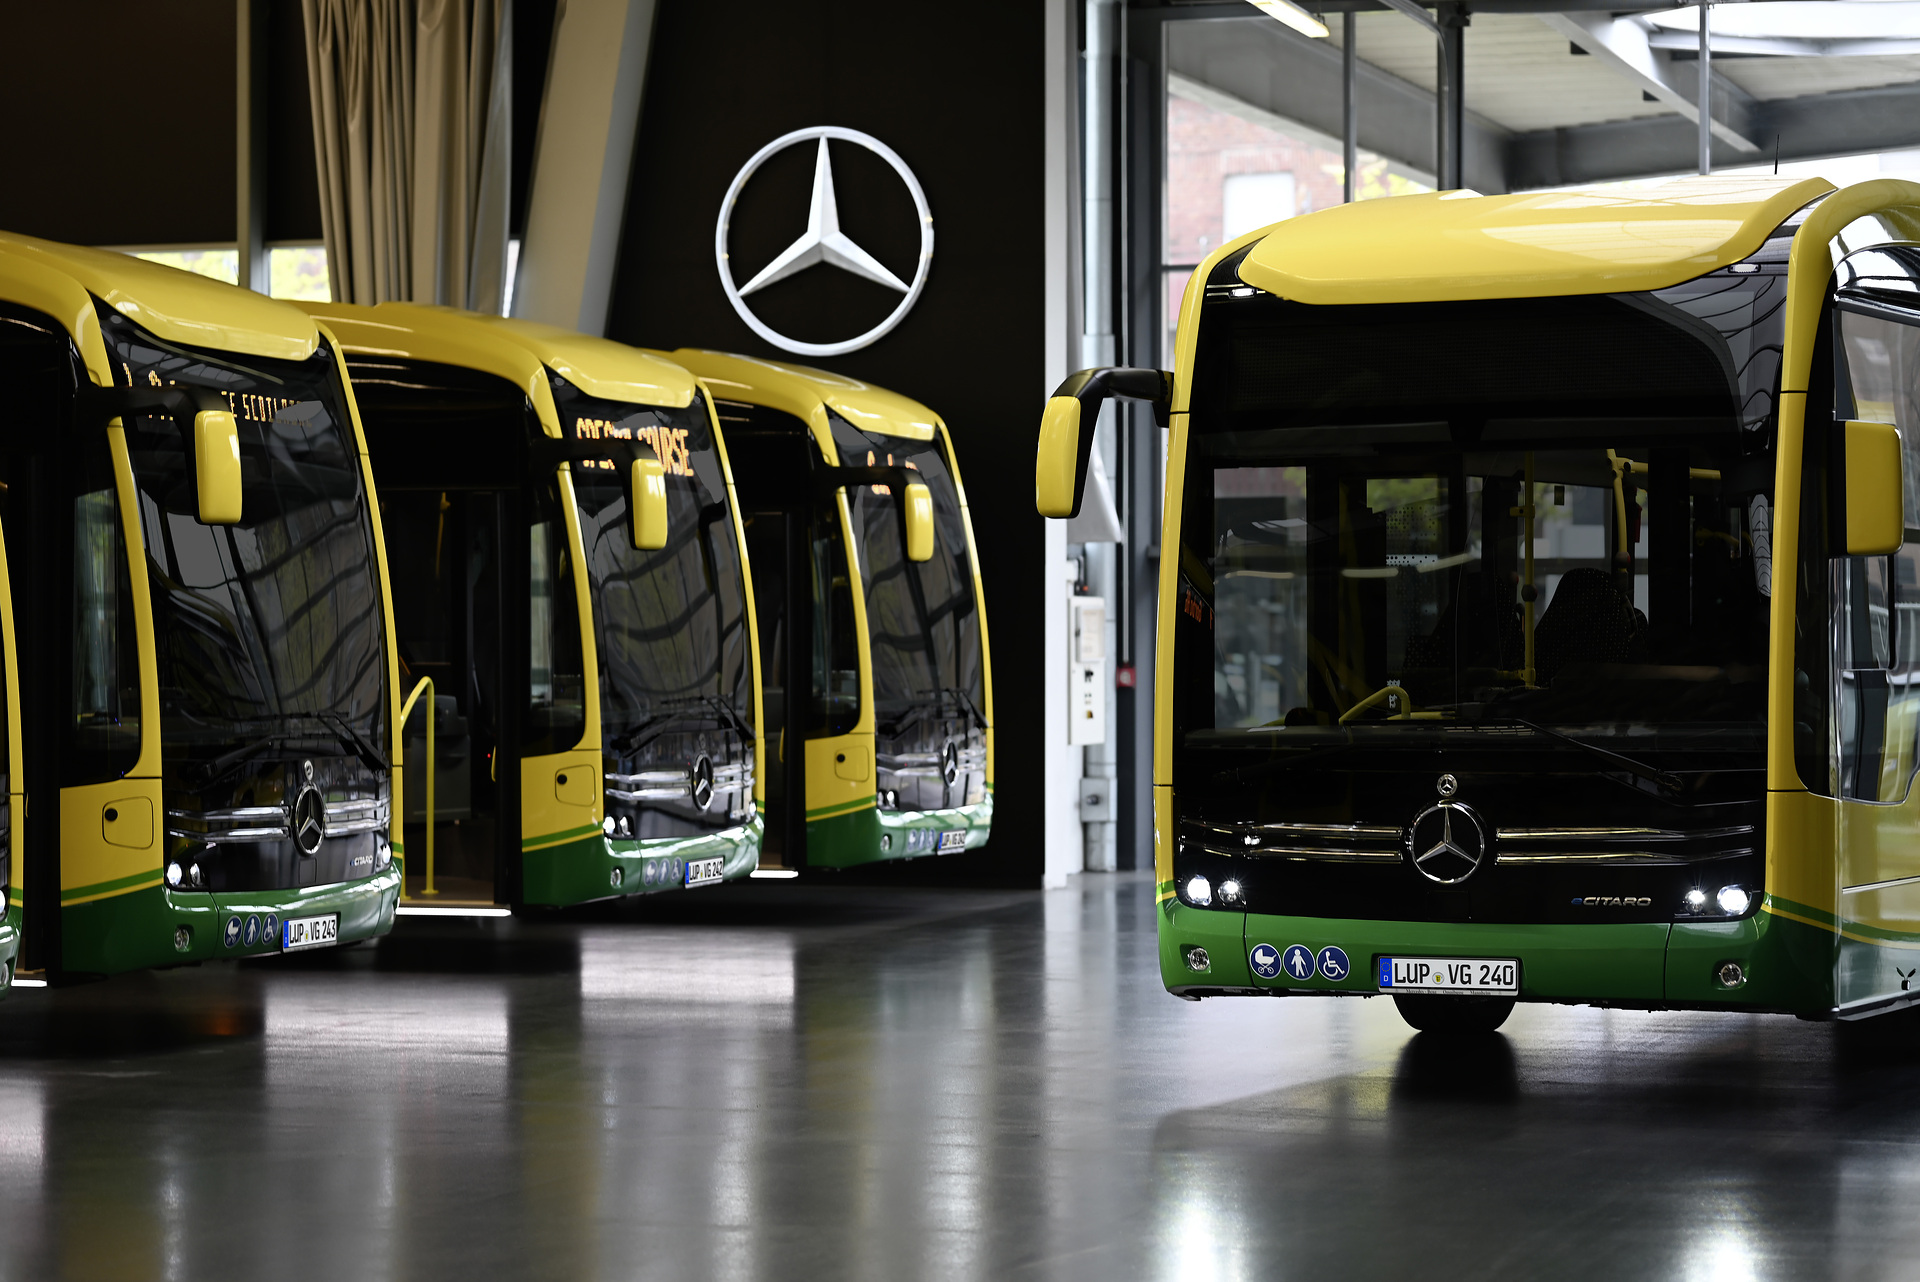 Mercedes-Benz eCitaro electrifies inter-city routes: 45 electric buses delivered to the VLP transport company in Mecklenburg-Western Pomerania